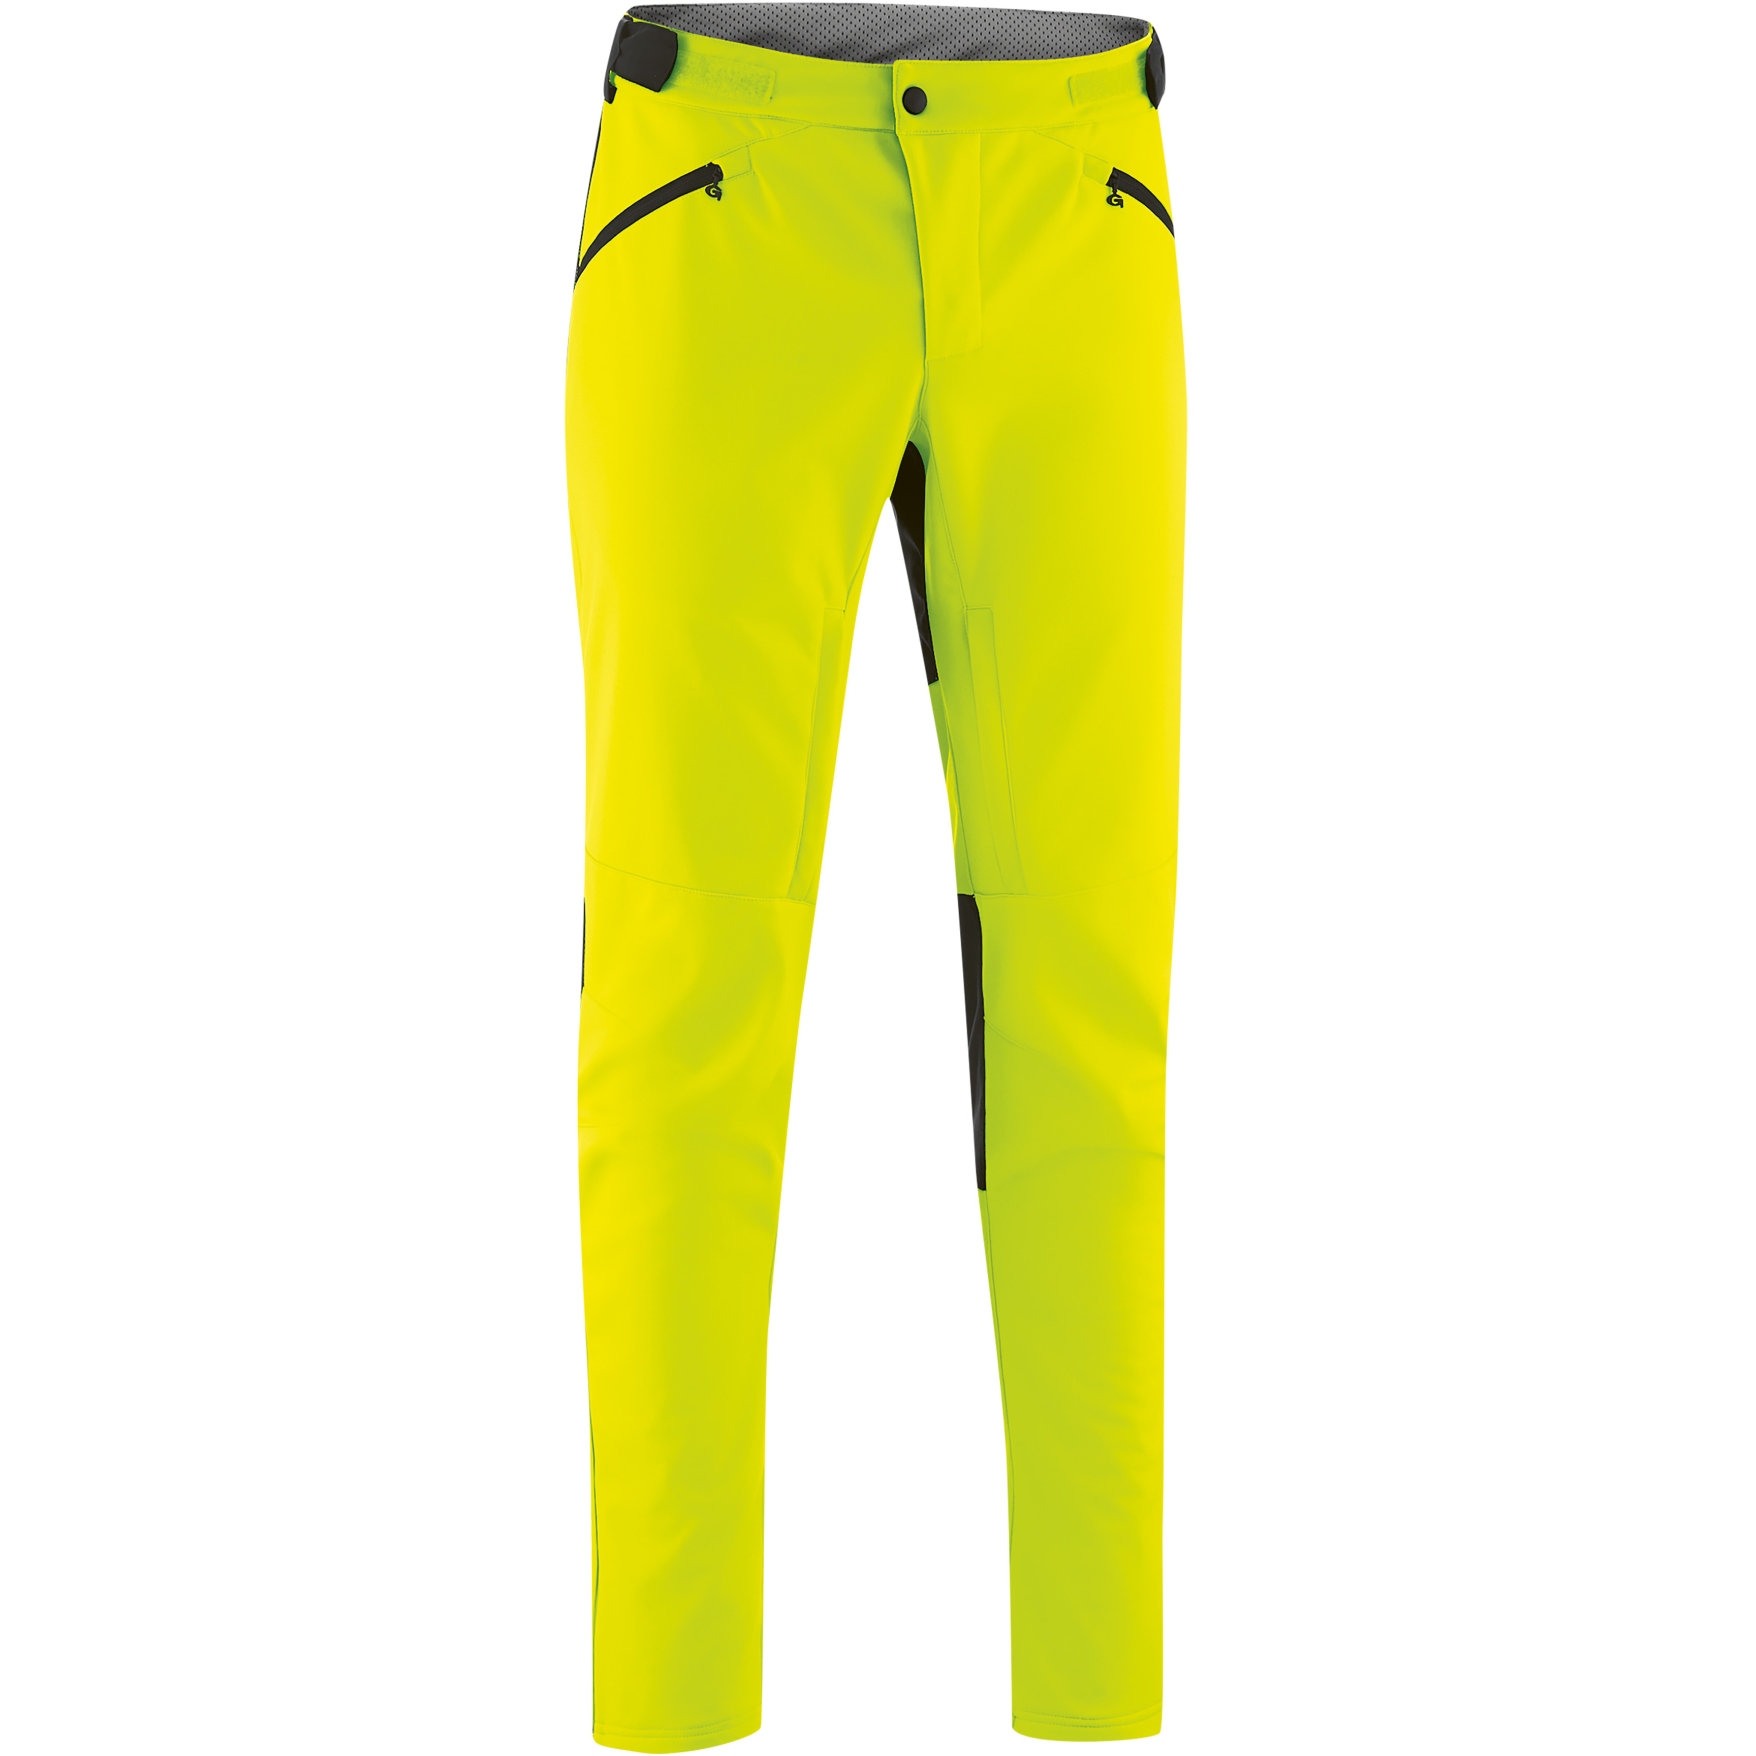 Picture of Gonso Skarn Bike Pants Men - Safety Yellow